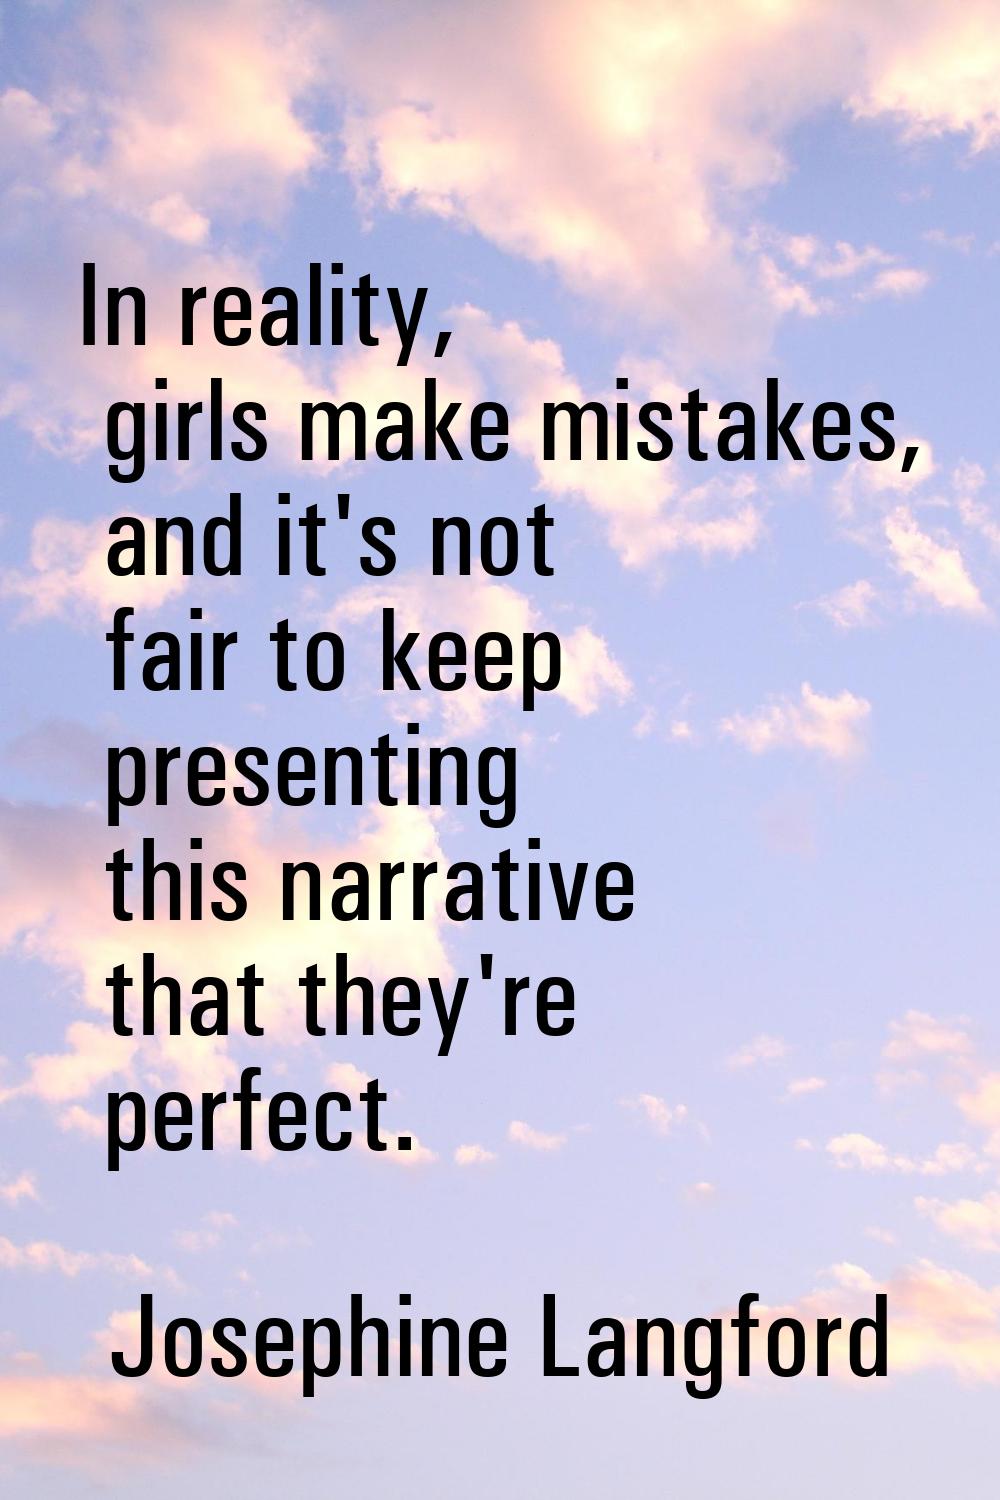 In reality, girls make mistakes, and it's not fair to keep presenting this narrative that they're p